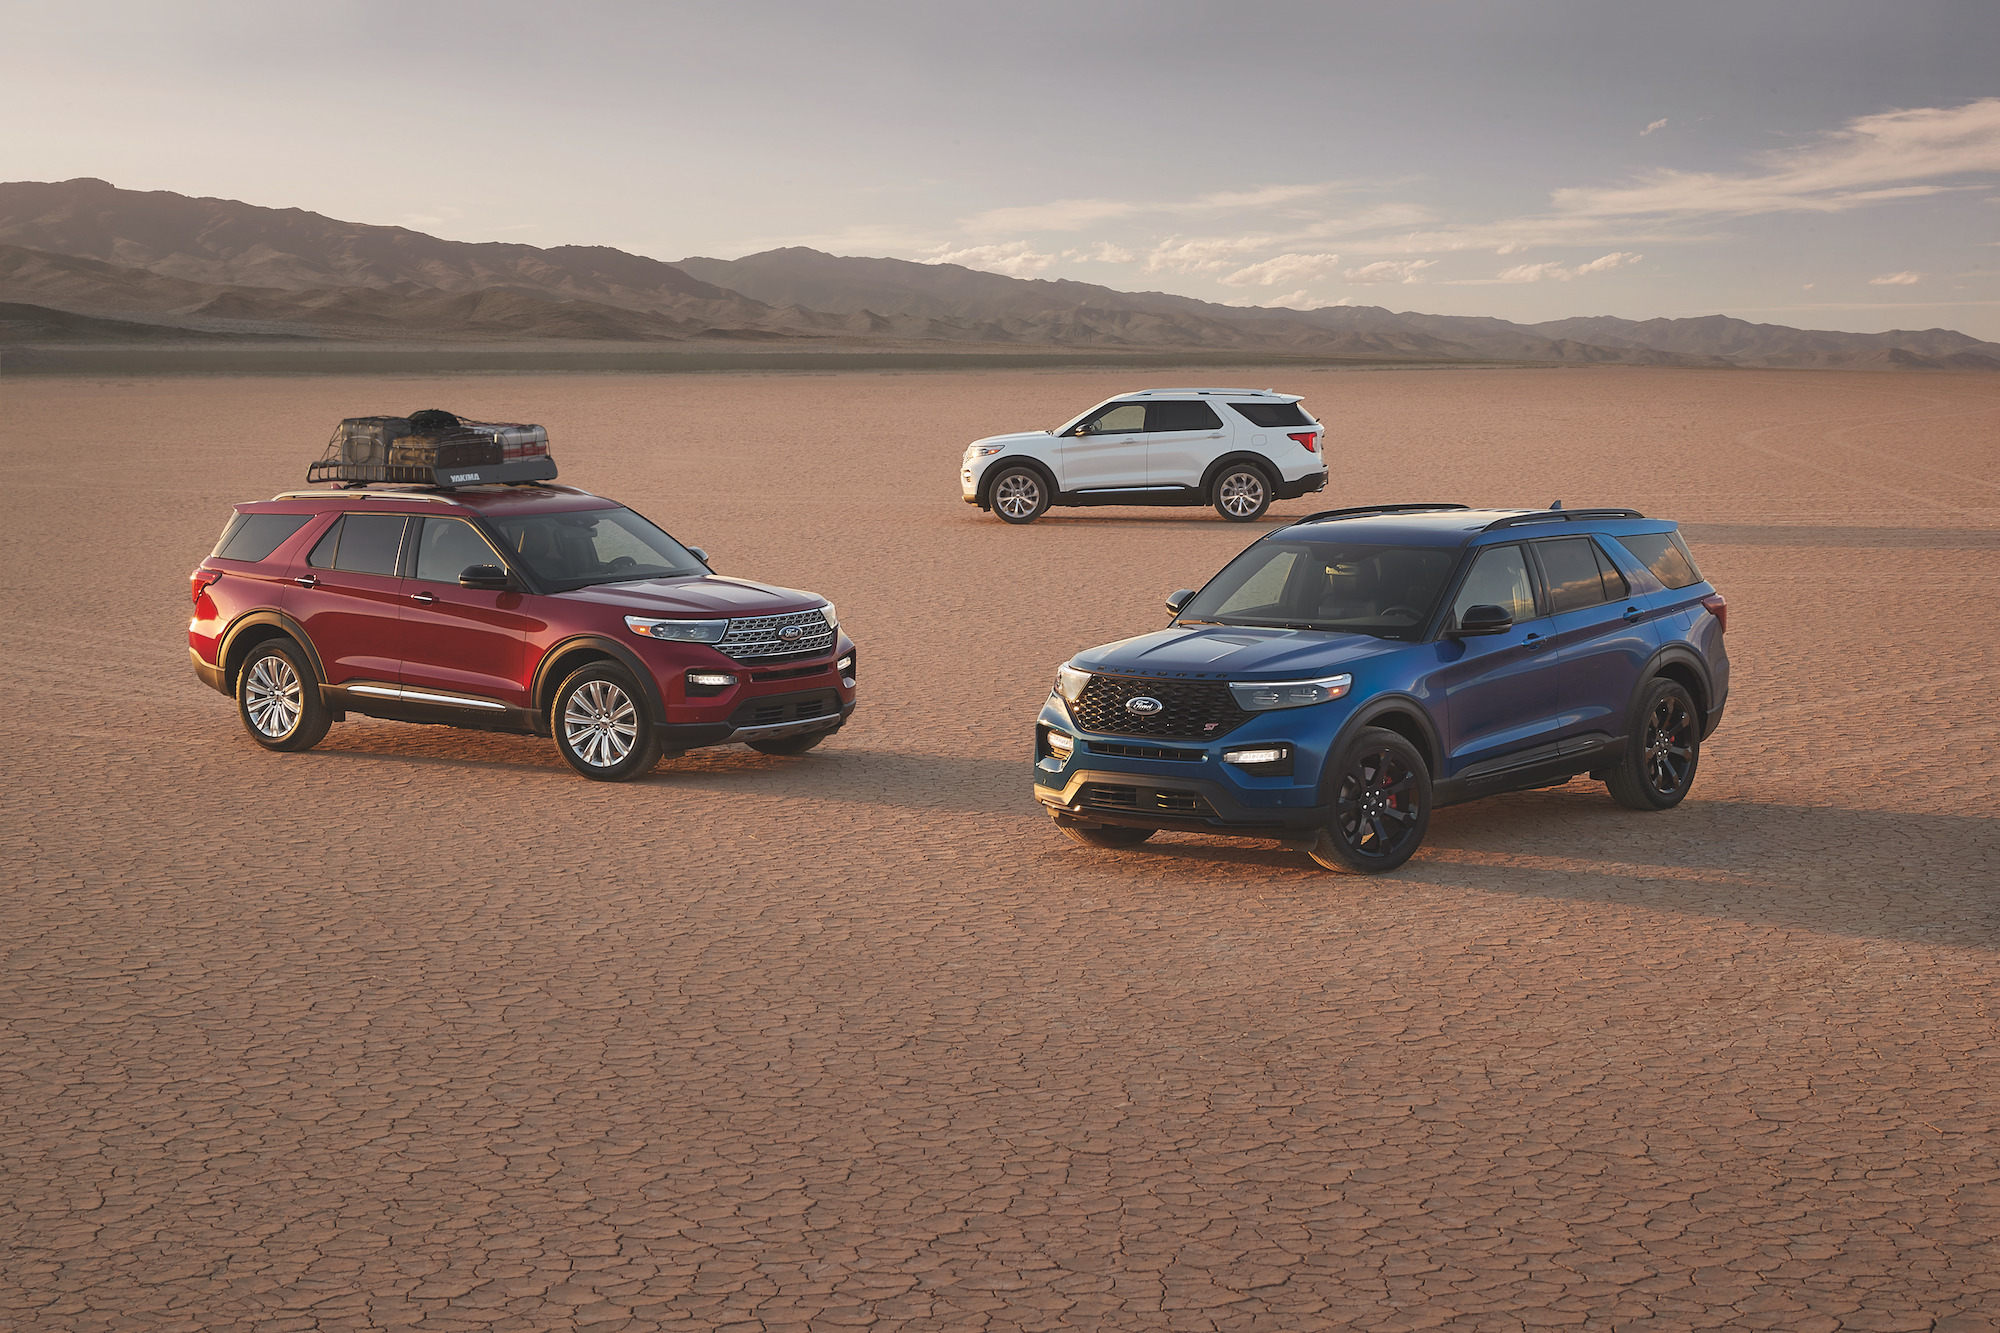 Three different 2022 Ford Explorers parked in a desert area.